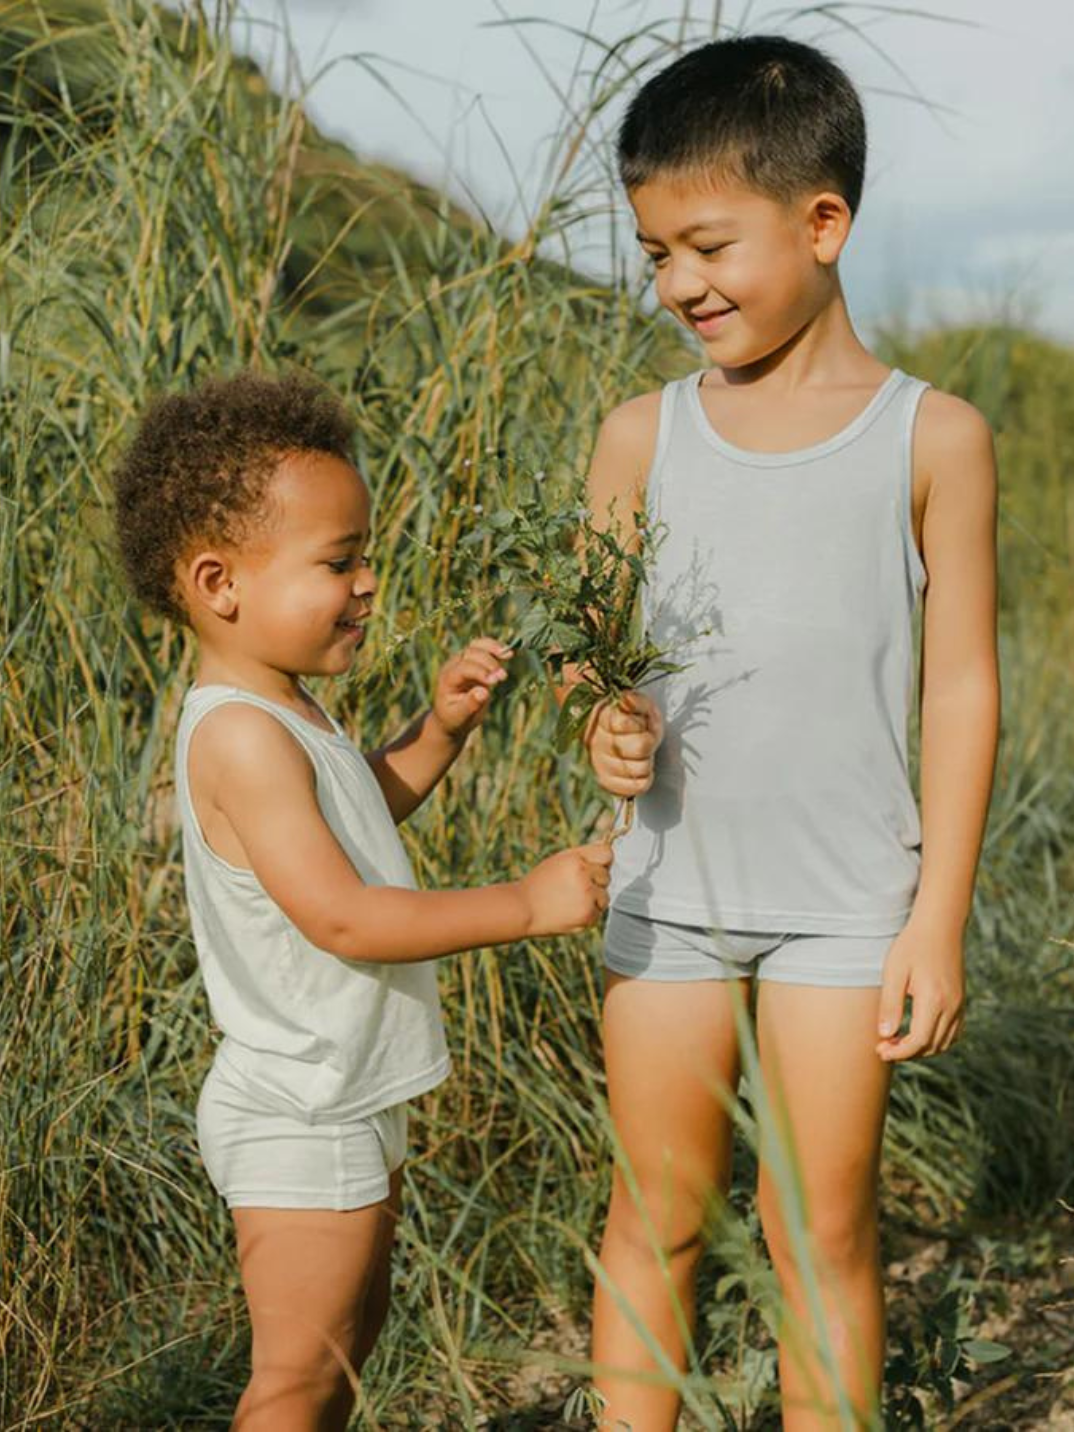 These tank tops are super soft and gentle on your little ones' skin. Designed with a loose, unisex fit for play, movement and a comfy night's rest. Wear the breathable layer under garments for day or snooze in the ultimate comfort. Made with eco modal fabric. This set comes with: 1x green tank top and 1x blue tank top.